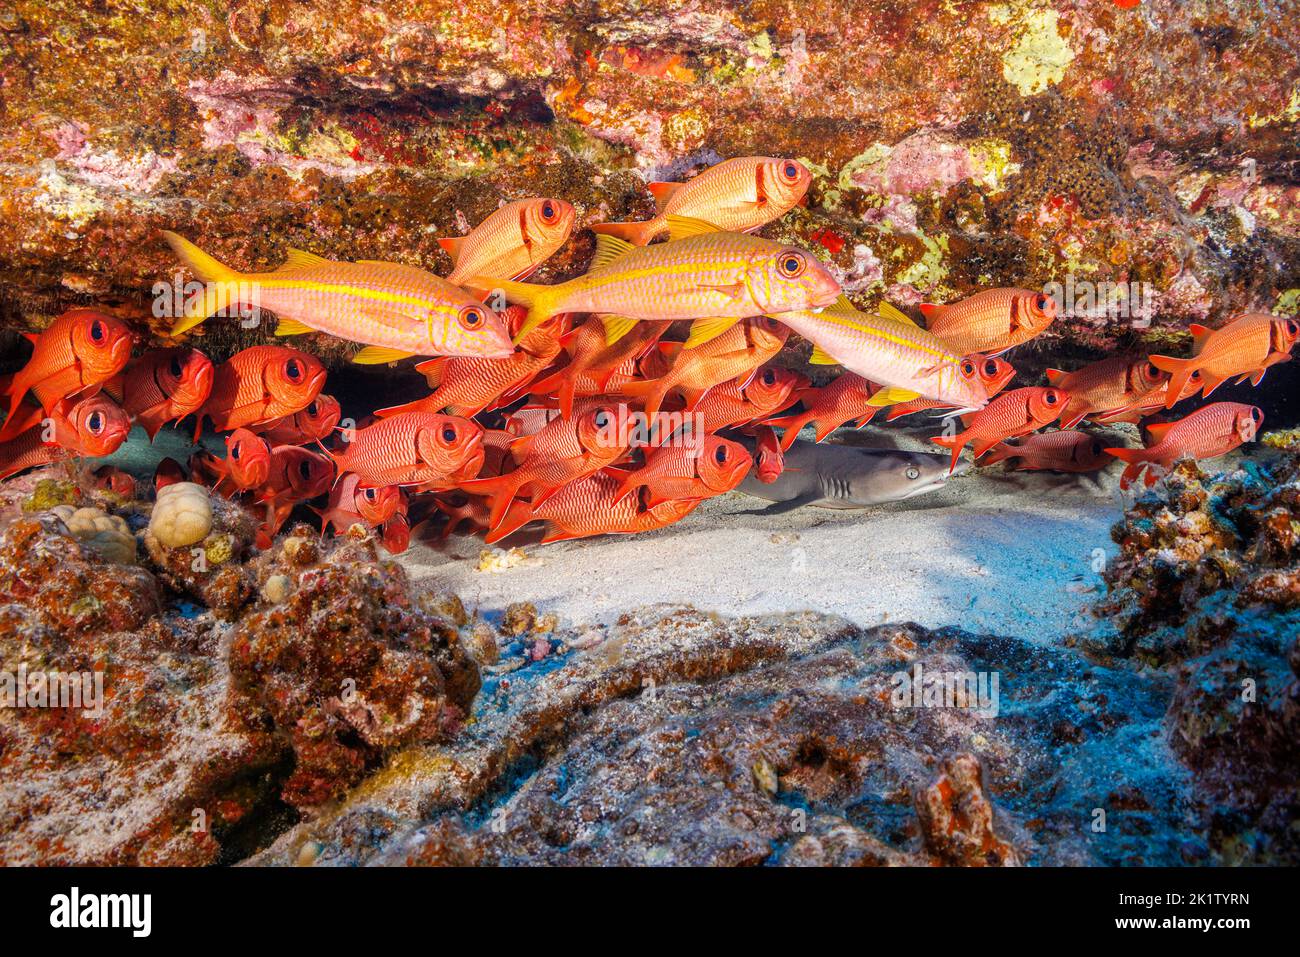 A small whitetip reef sharks, Triaenodon obesus, rests in a crevice behind yellowfin goatfish, Mulloidichthys vanicolensis, and shoulderbar soldierfis Stock Photo